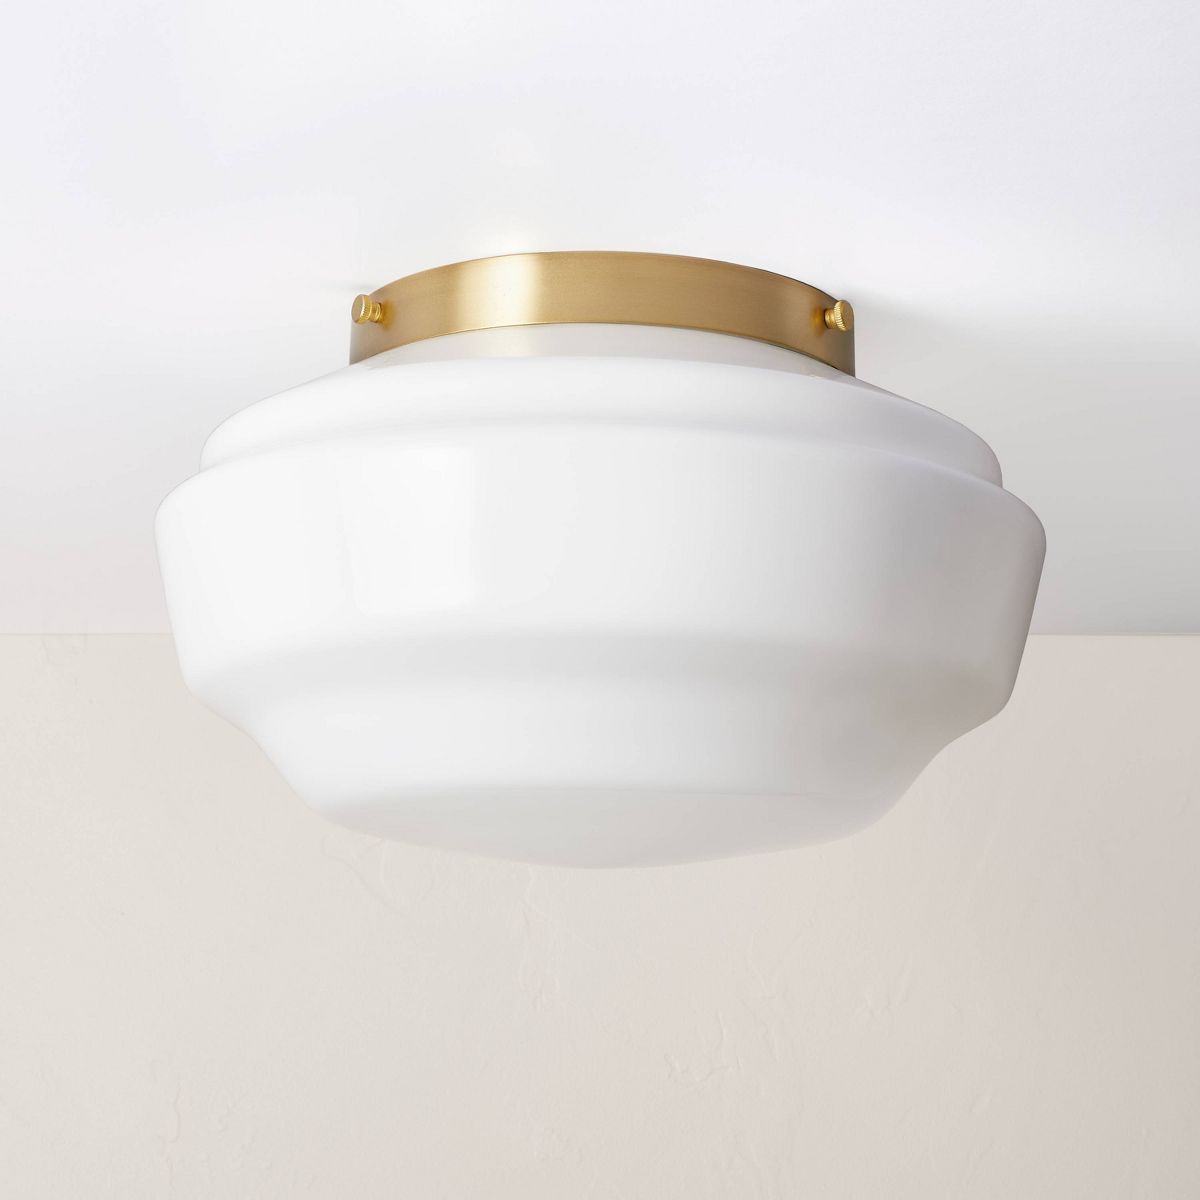 Milk Glass Flush Mount Celling Light Brass Finish - Hearth & Hand™ with Magnolia | Target